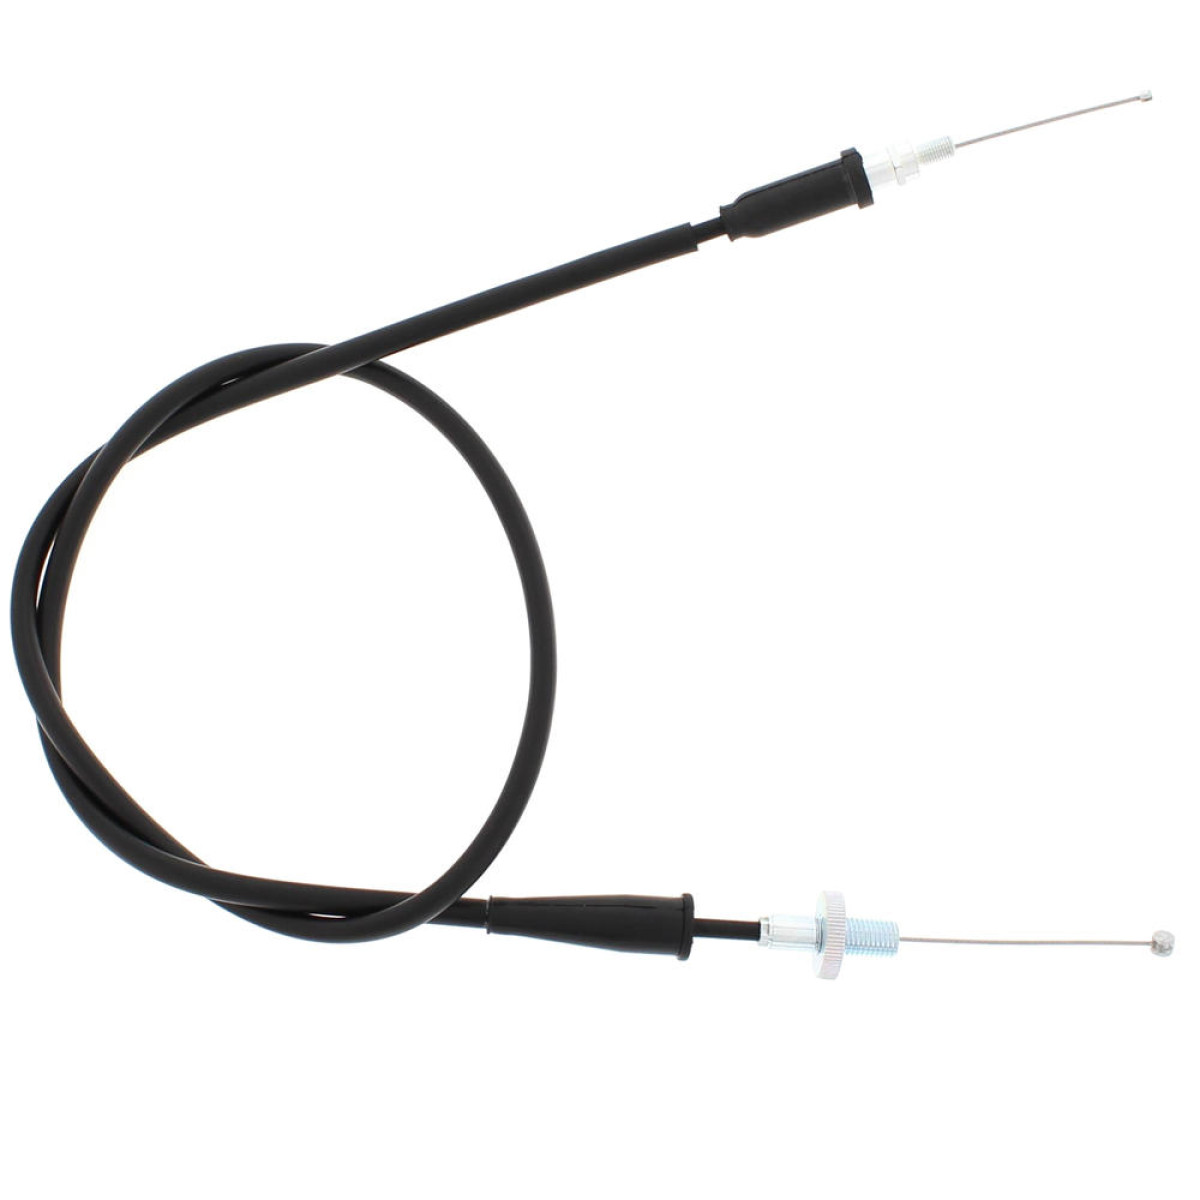 Moose Racing Throttle Cable  KTM SX 65 09-18